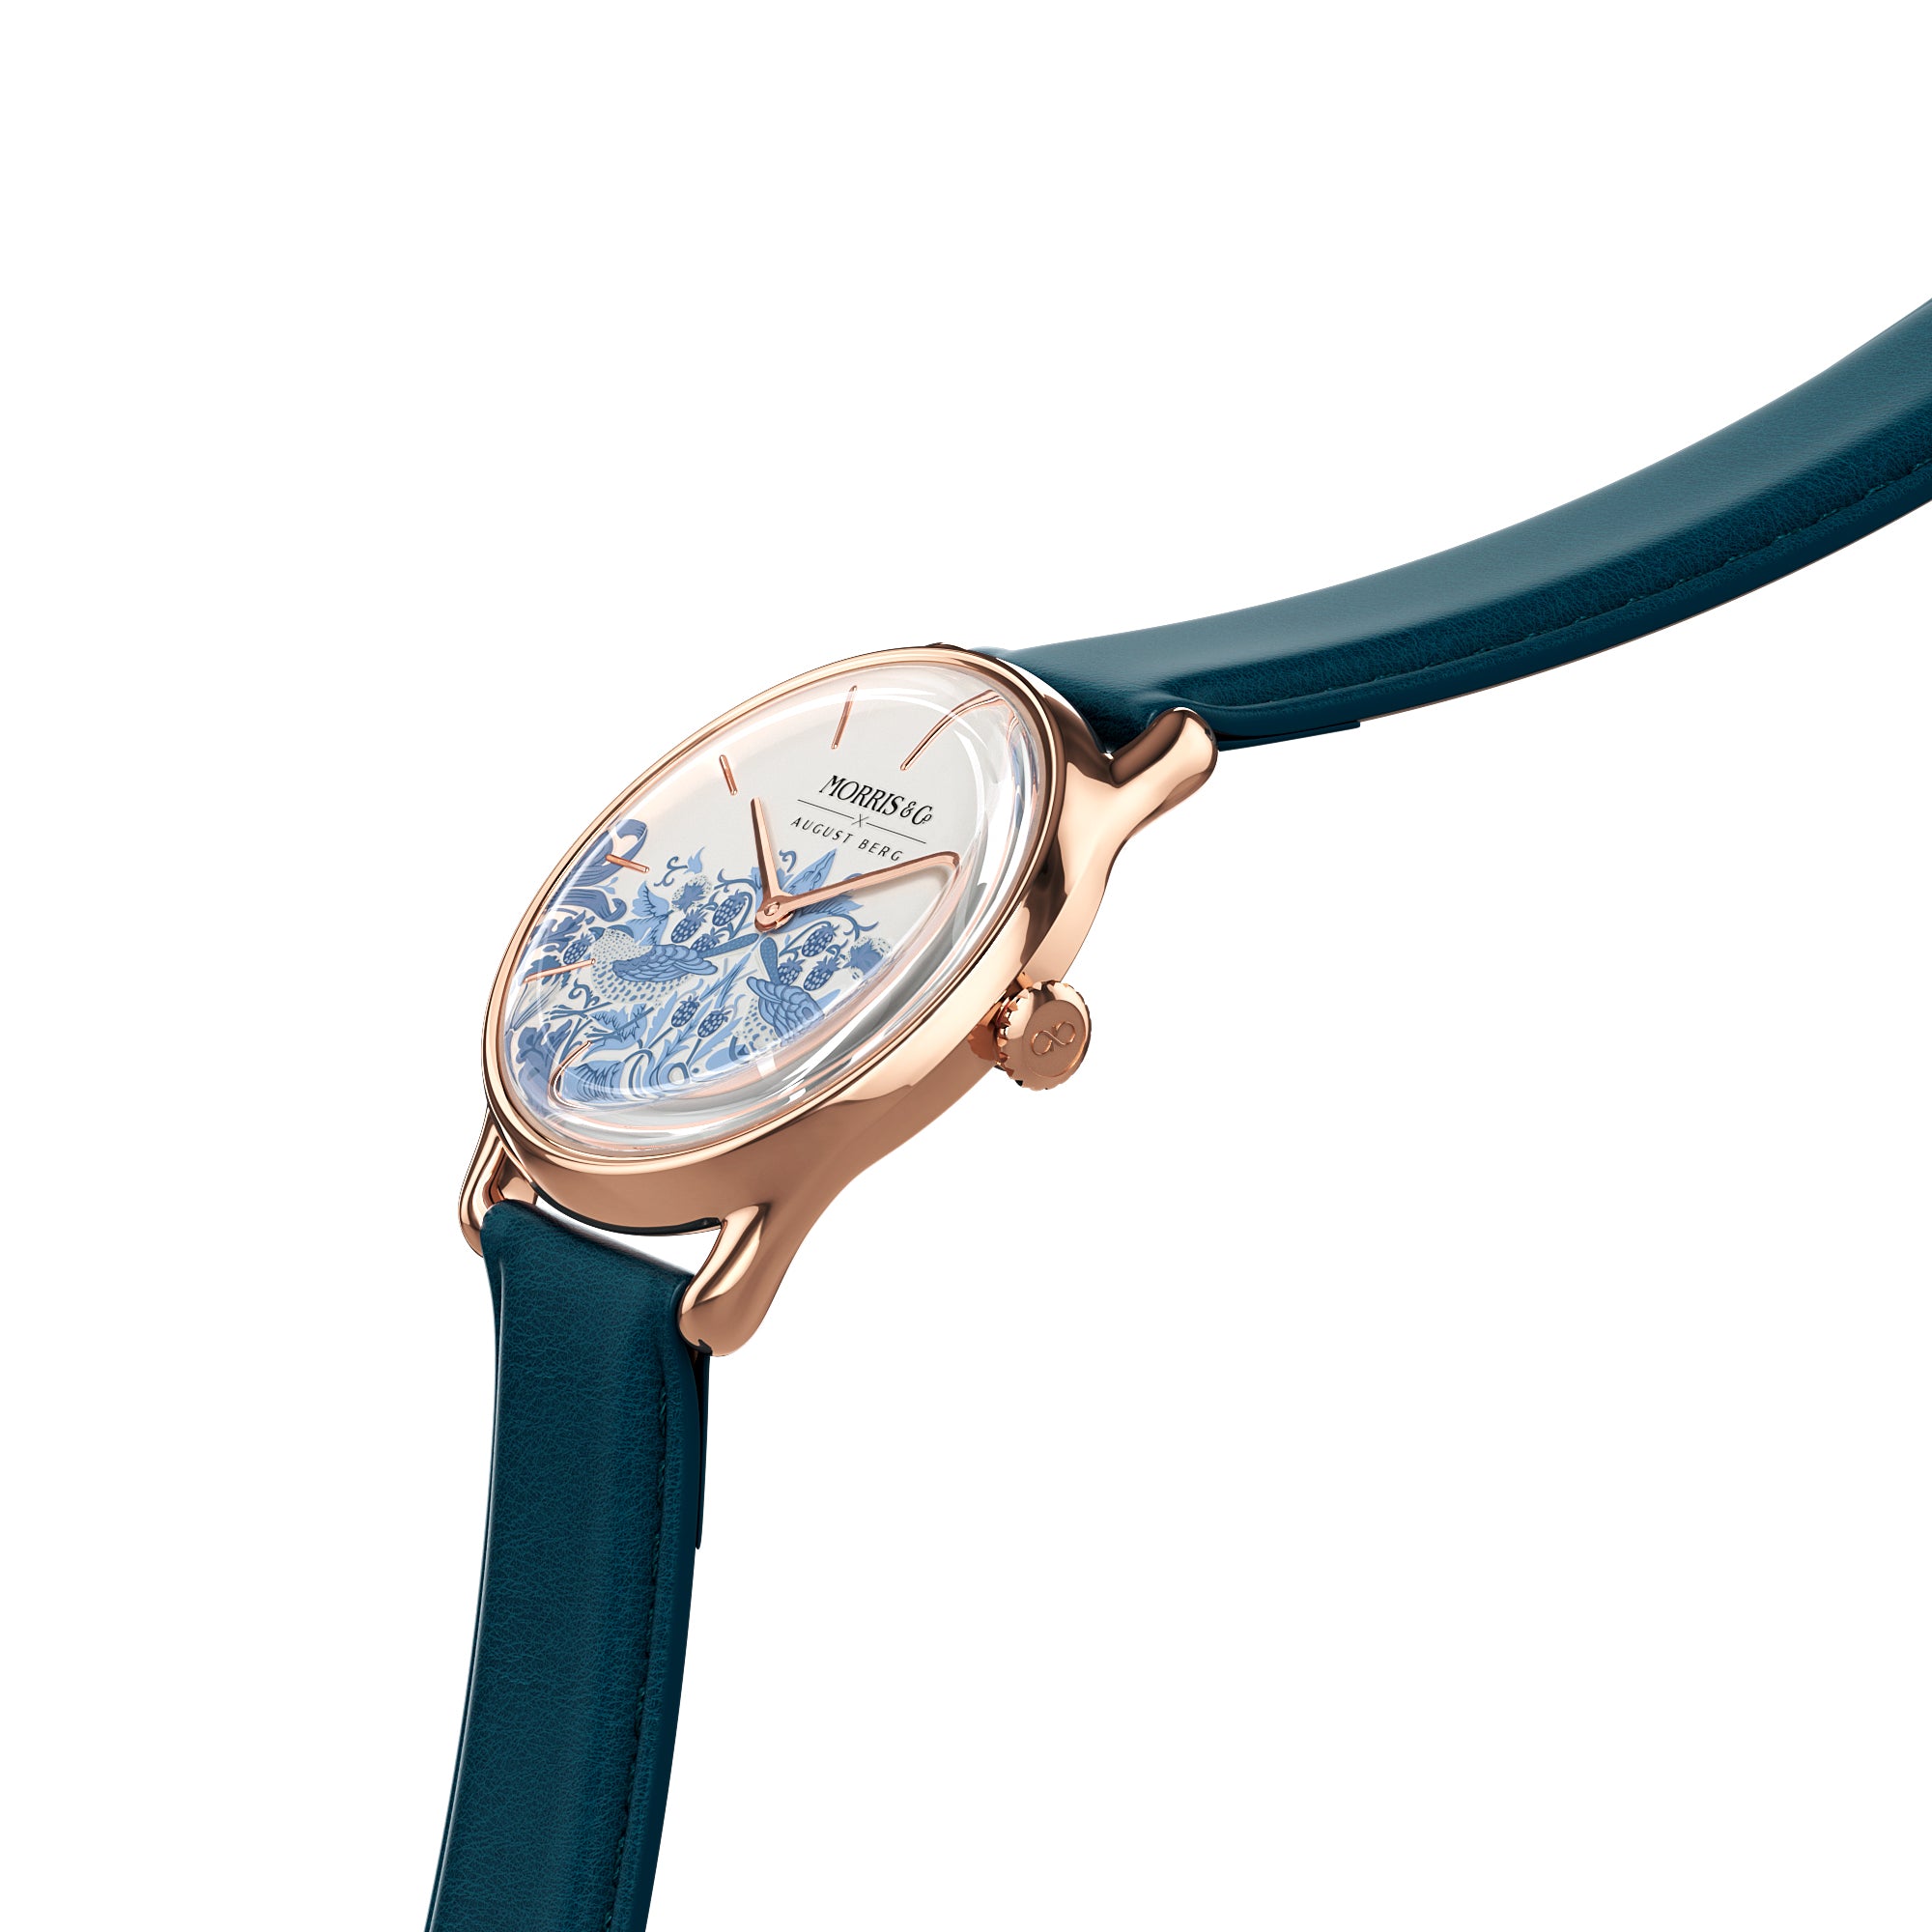 Rose Gold Watch | Woad Blue Italian Leather | Simply Strawberry Thief | AUGUST BERG x MORRIS & CO.